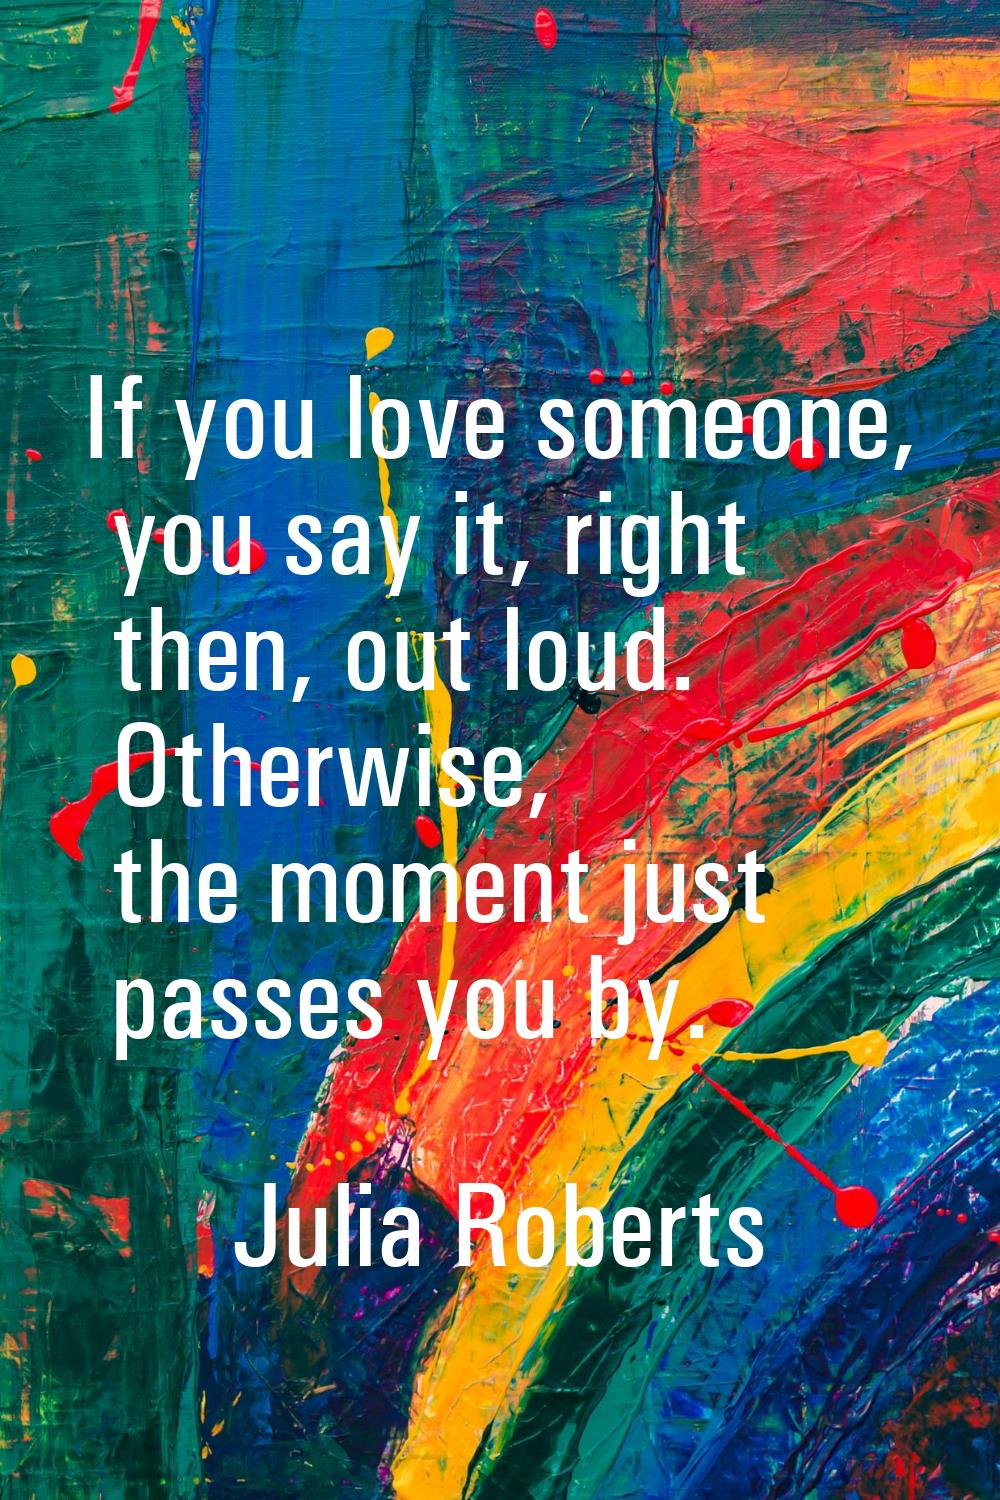 If you love someone, you say it, right then, out loud. Otherwise, the moment just passes you by.